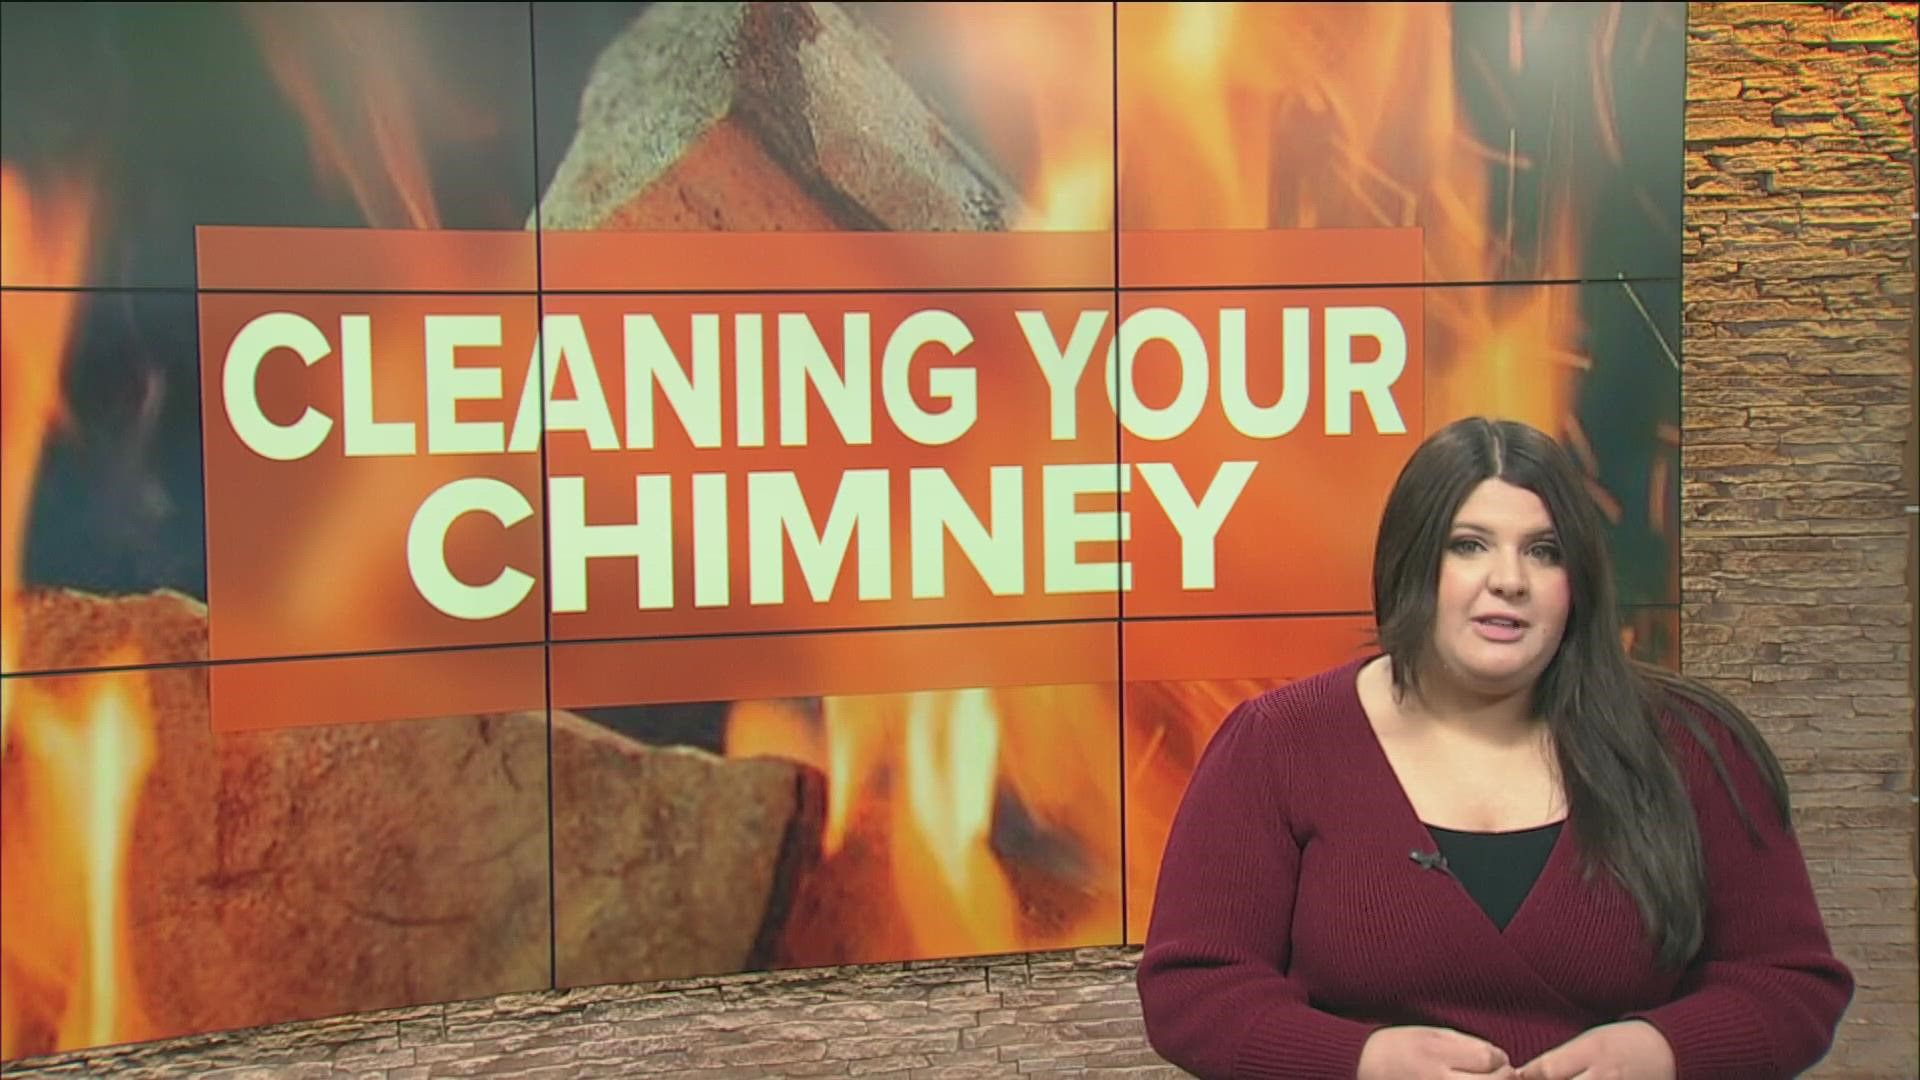 WTOL 11 reporter Zeinab Cheaib talked to professionals on how to maintain your chimney and prevent fires.